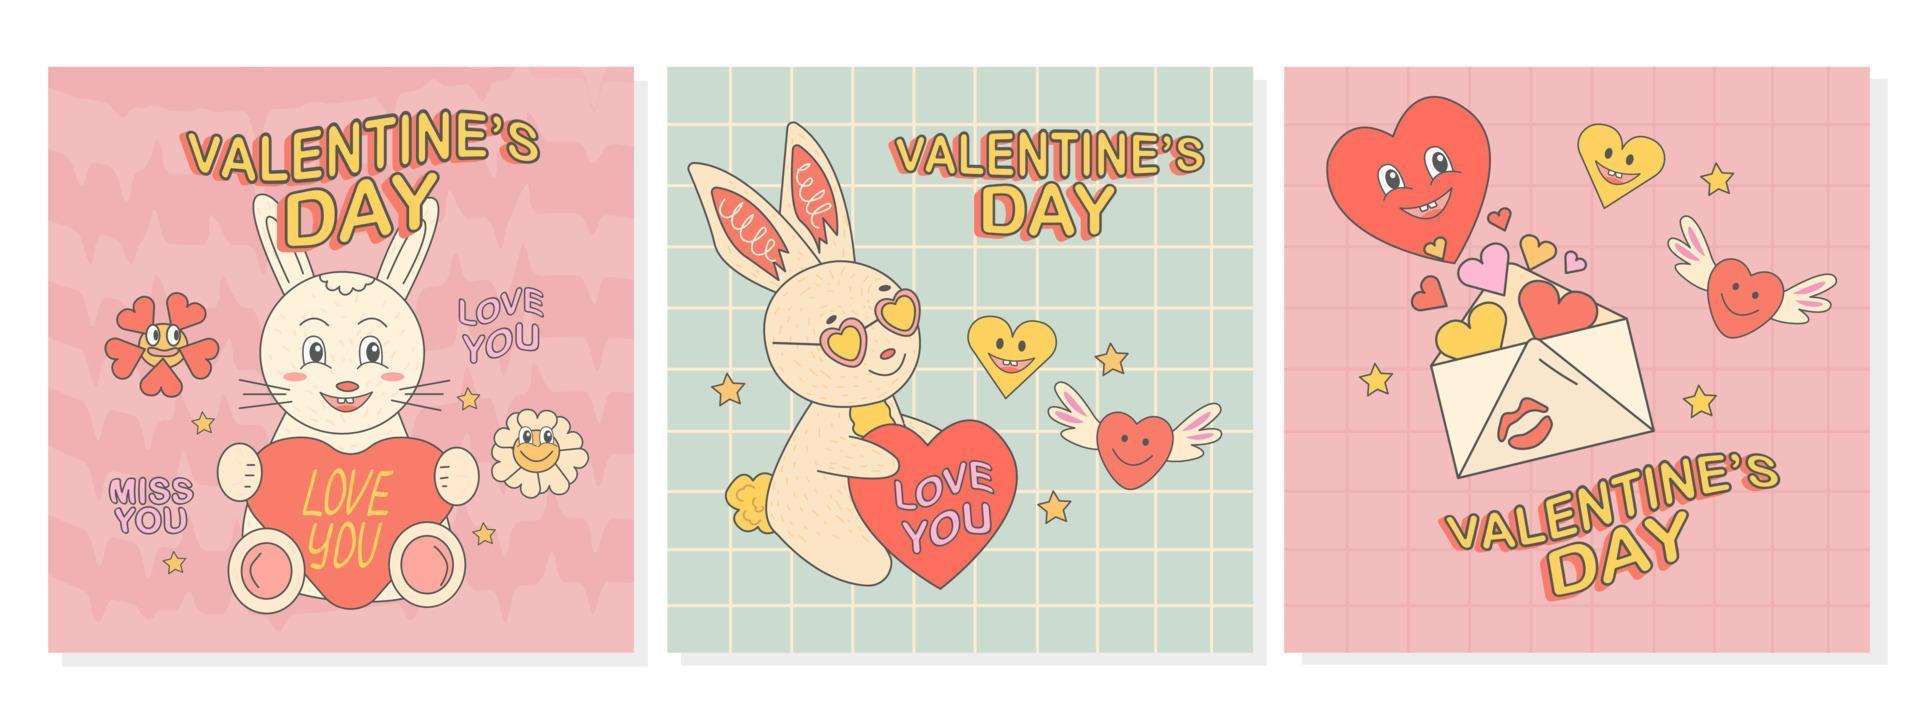 Groovy set of postcard with retro rabbit, heart, daisies and text. Hippie 60s, 70s style. vector